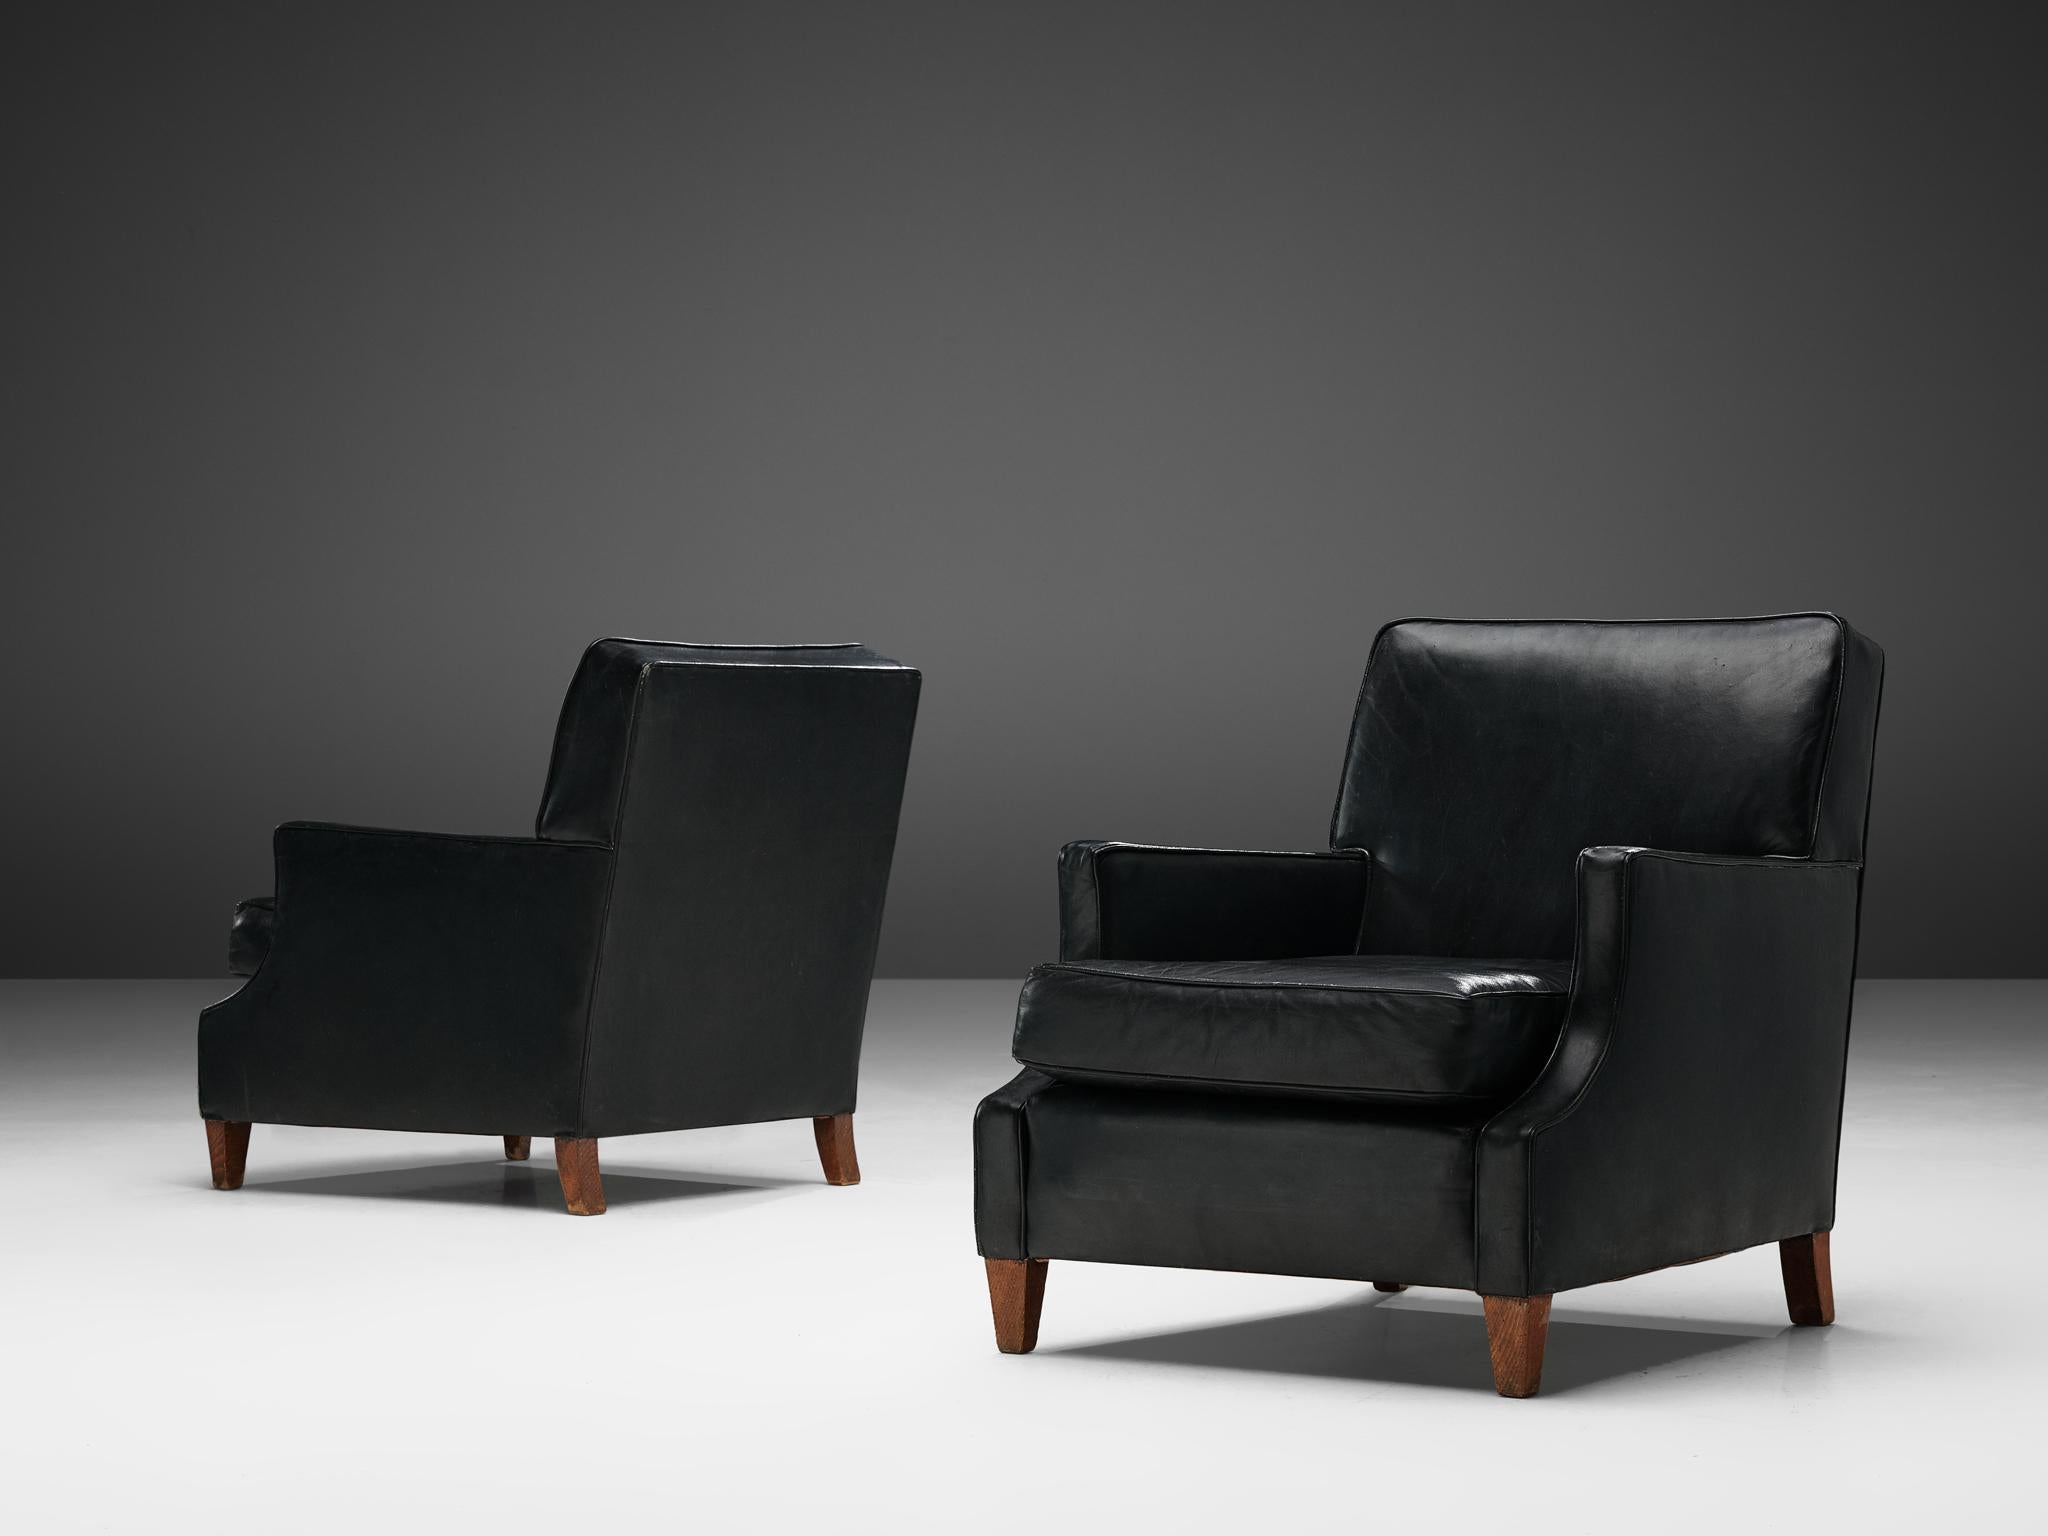 Pair of easy chairs, leather, stained beech, Denmark, 1970s

These lounge chairs embody the essence of Danish design. They are comfortable, expertly crafted, and boast a simple aesthetic that is elevated by the use of high-quality materials and